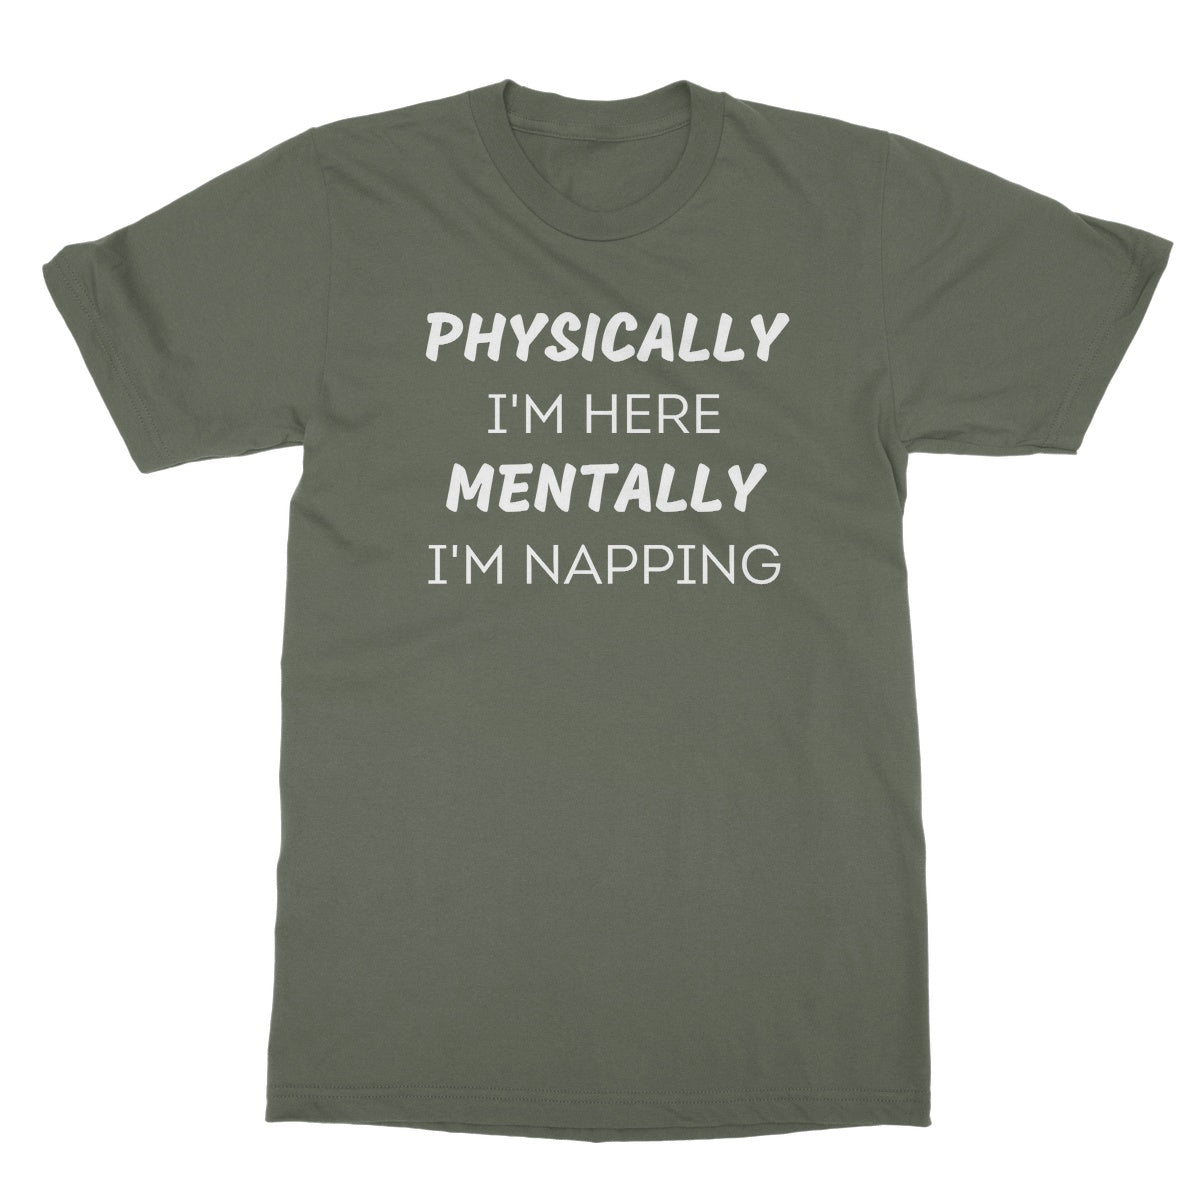 physically here mentally napping t shirt green